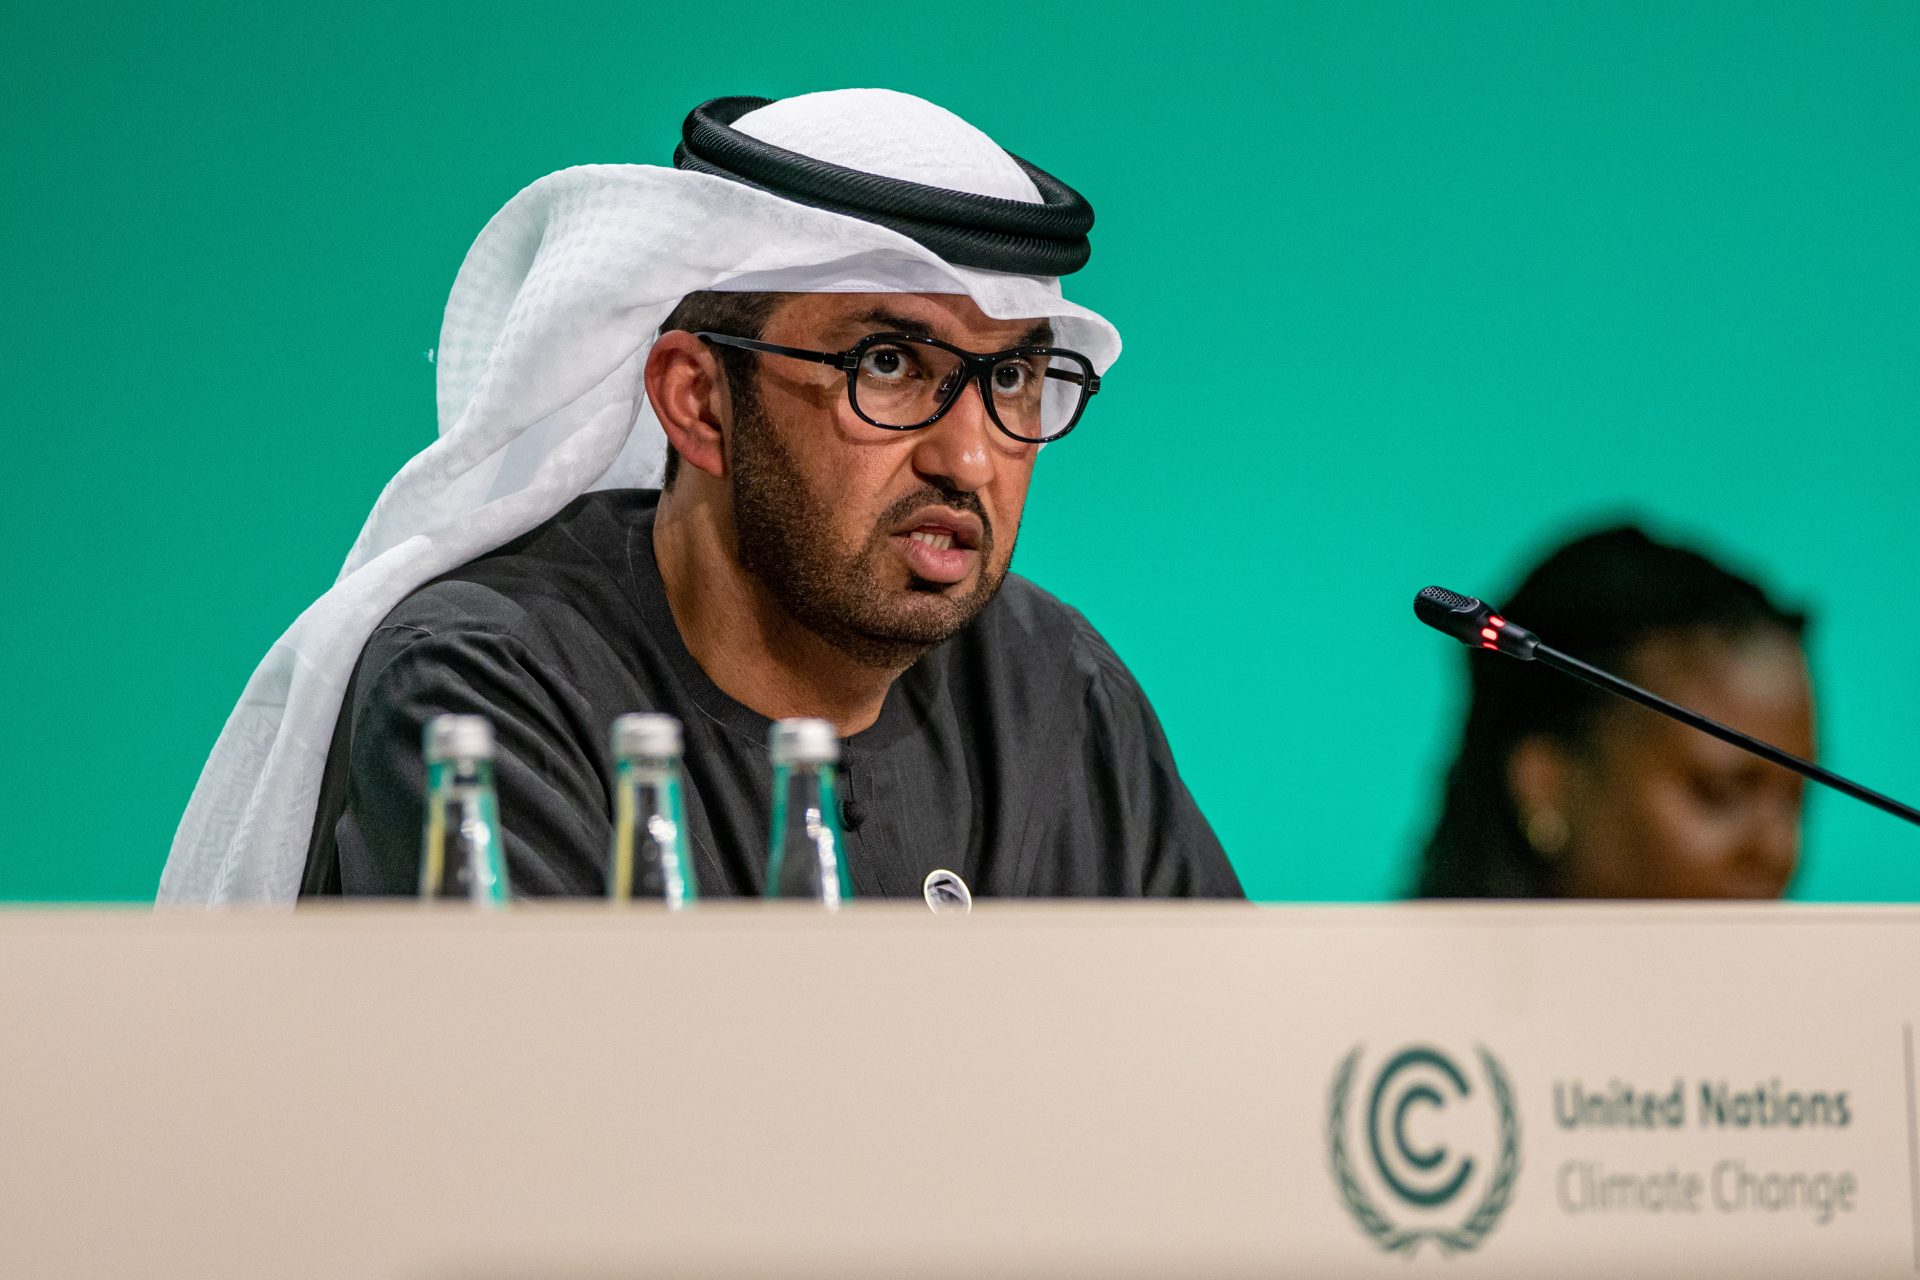 Dubai (United Arab Emirates), 11/12/2023.- President of COP28 and UAE's Minister for Industry and Advanced Technology Dr. Sultan Ahmed Al Jaber speaks during the 2023 United Nations Climate Change Conference (COP28), in Dubai, United Arab Emirates, 11 December 2023. The 2023 United Nations Climate Change Conference (COP28), runs from 30 November to 12 December, and is expected to host one of the largest number of participants in the annual global climate conference as over 70,000 estimated attendees, including the member states of the UN Framework Convention on Climate Change (UNFCCC), business leaders, young people, climate scientists, Indigenous Peoples and other relevant stakeholders will attend. (Emiratos Árabes Unidos) EFE/EPA/MARTIN DIVISEK